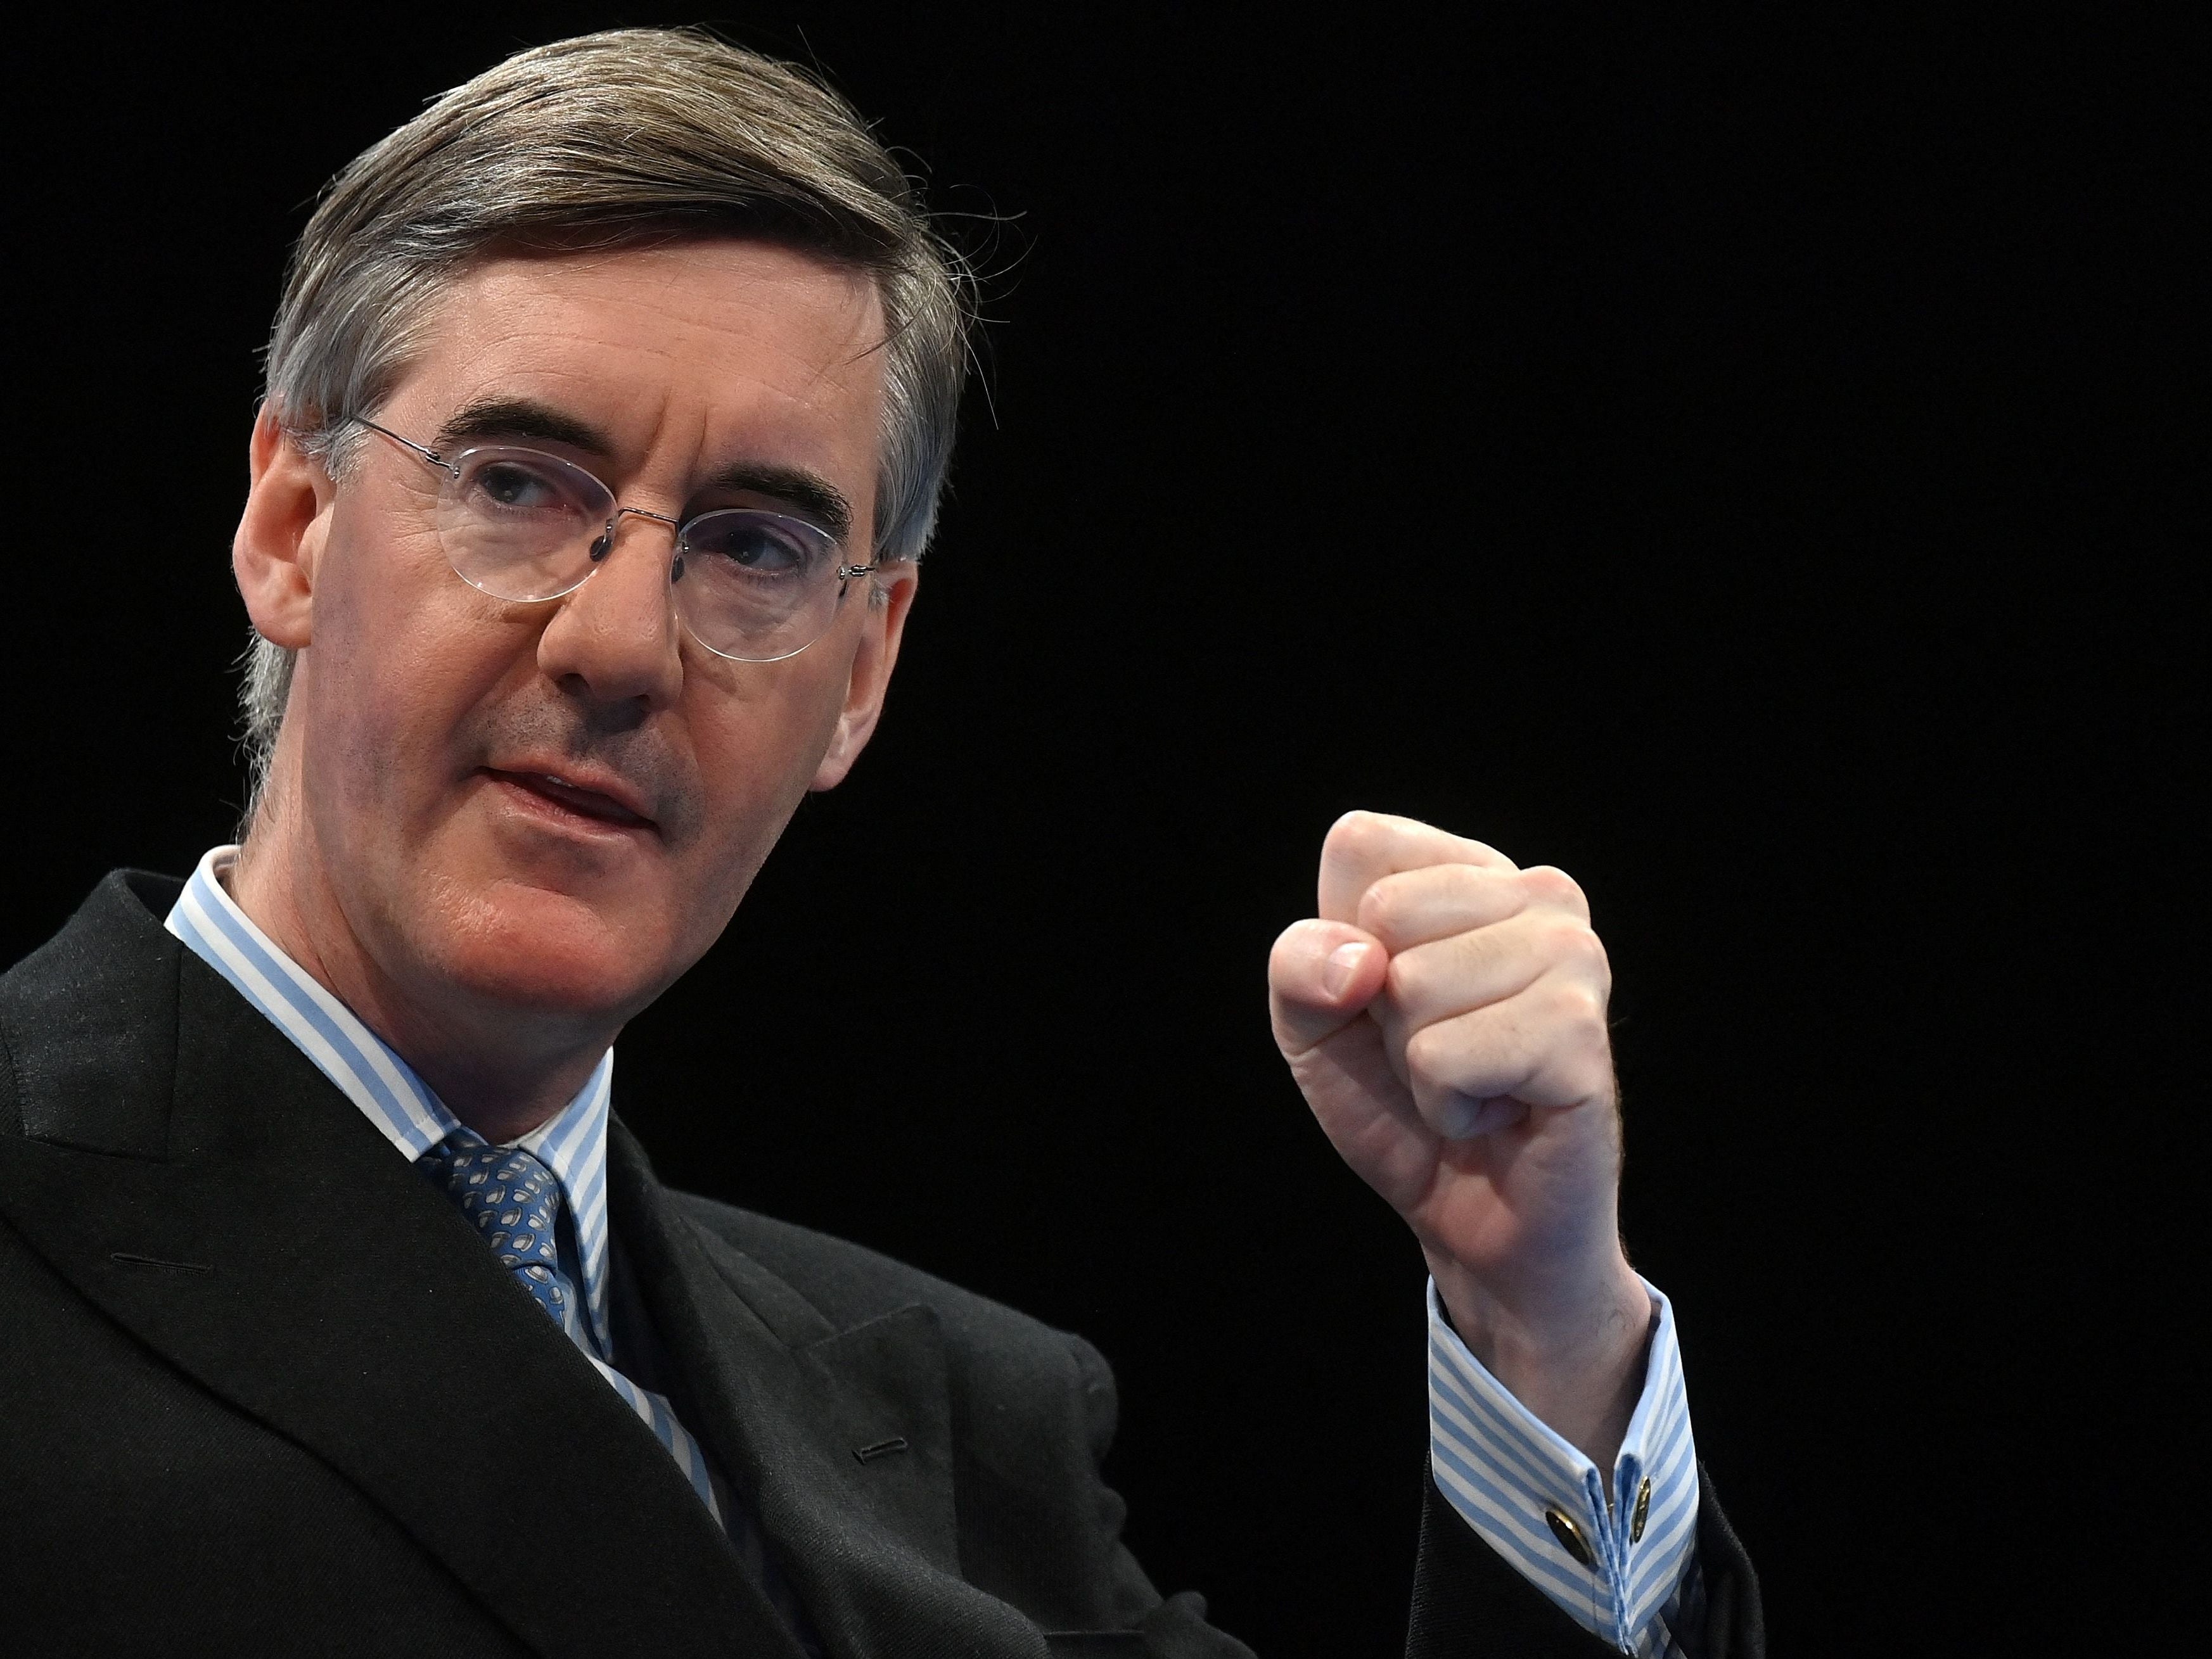 Commons leader Jacob Rees-Mogg